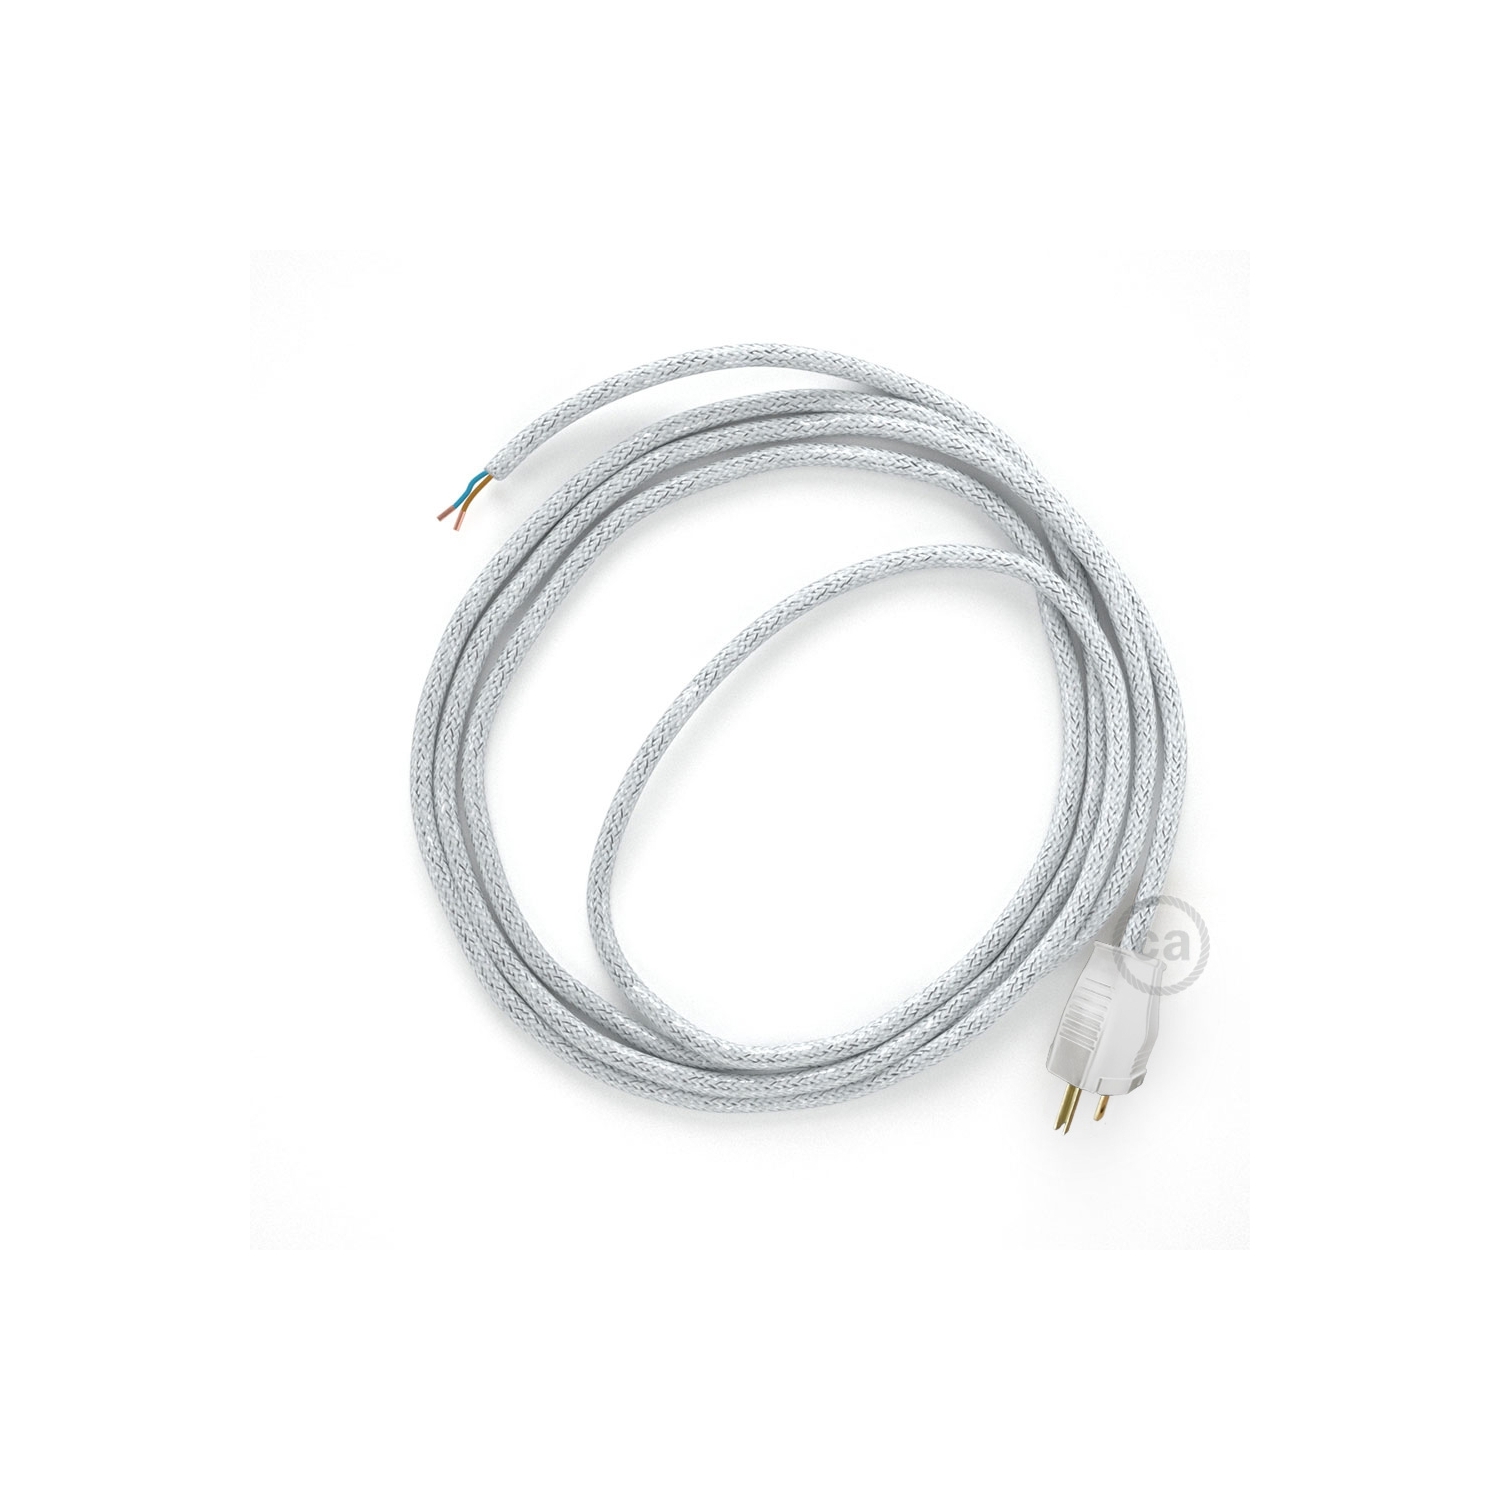 Cord-set - RL01 White Glitter Covered Round Cable